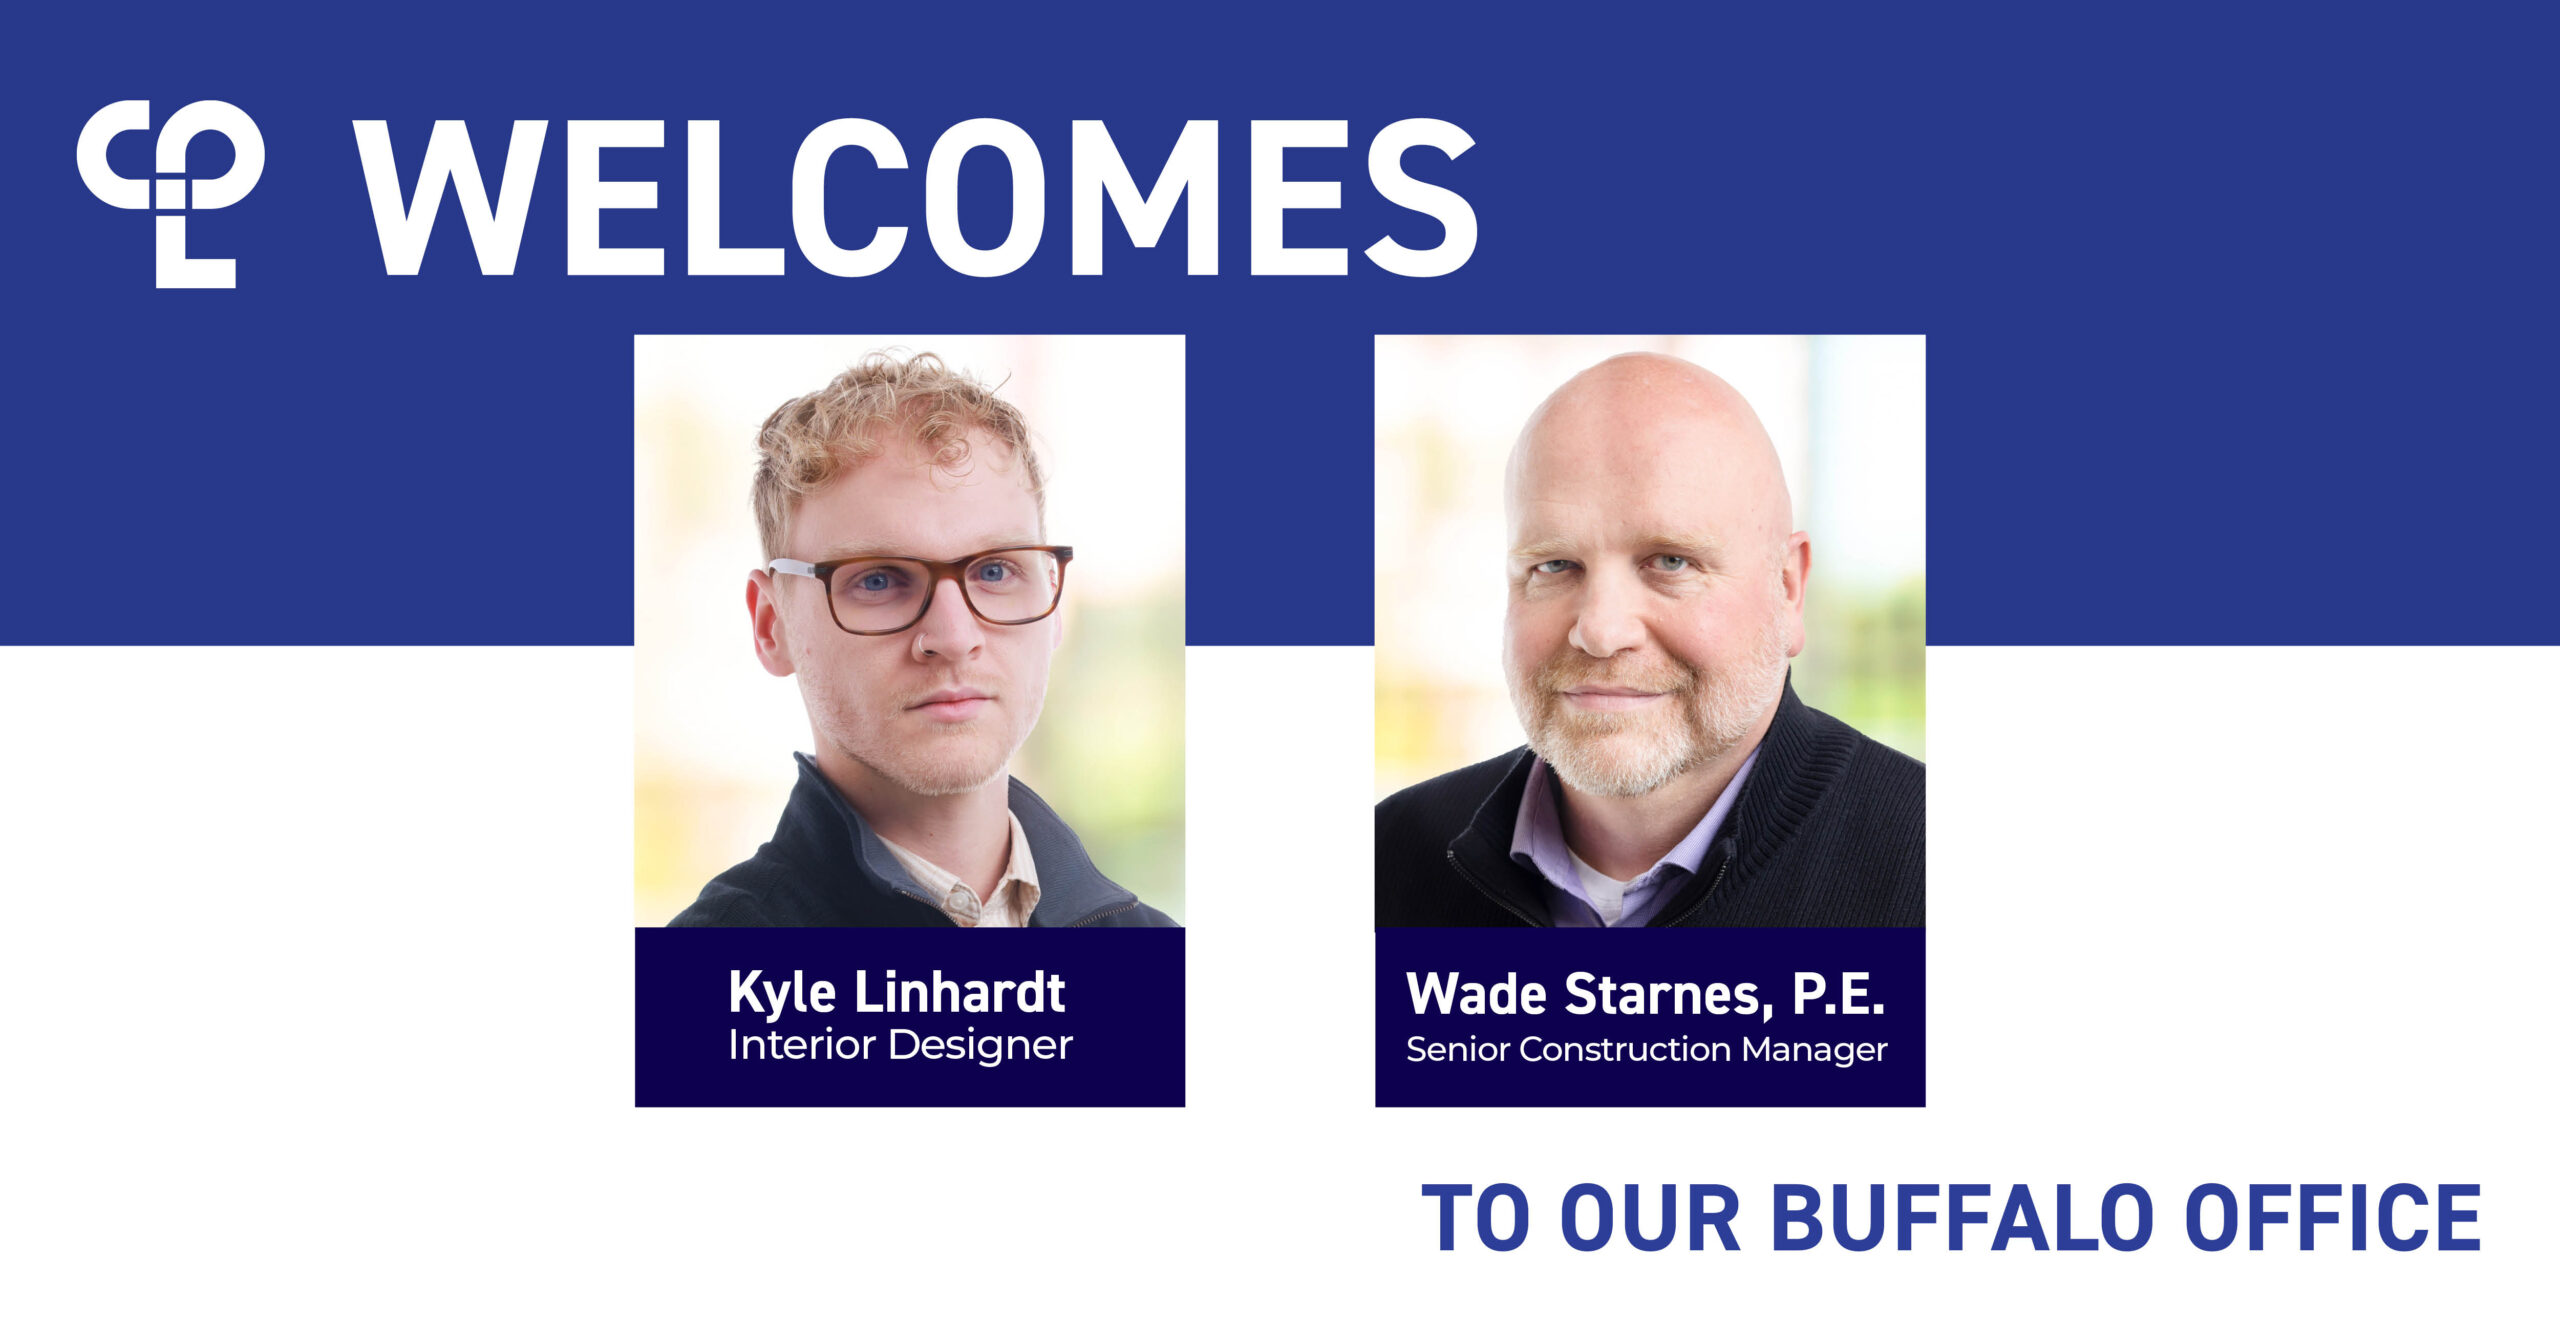 A graphic with the CPL logo at the top that reads "CPL Welcomes Kyle Linhardt, Interior Designer. Wade Starnes, P.E. Senior Construction manager to our Buffalo office." Above Kyle Linhardt's title is a headshot of a blonde man with blue eyes and glasses. Next to him, above Wade Starnes title is an older bald man with blue eyes.